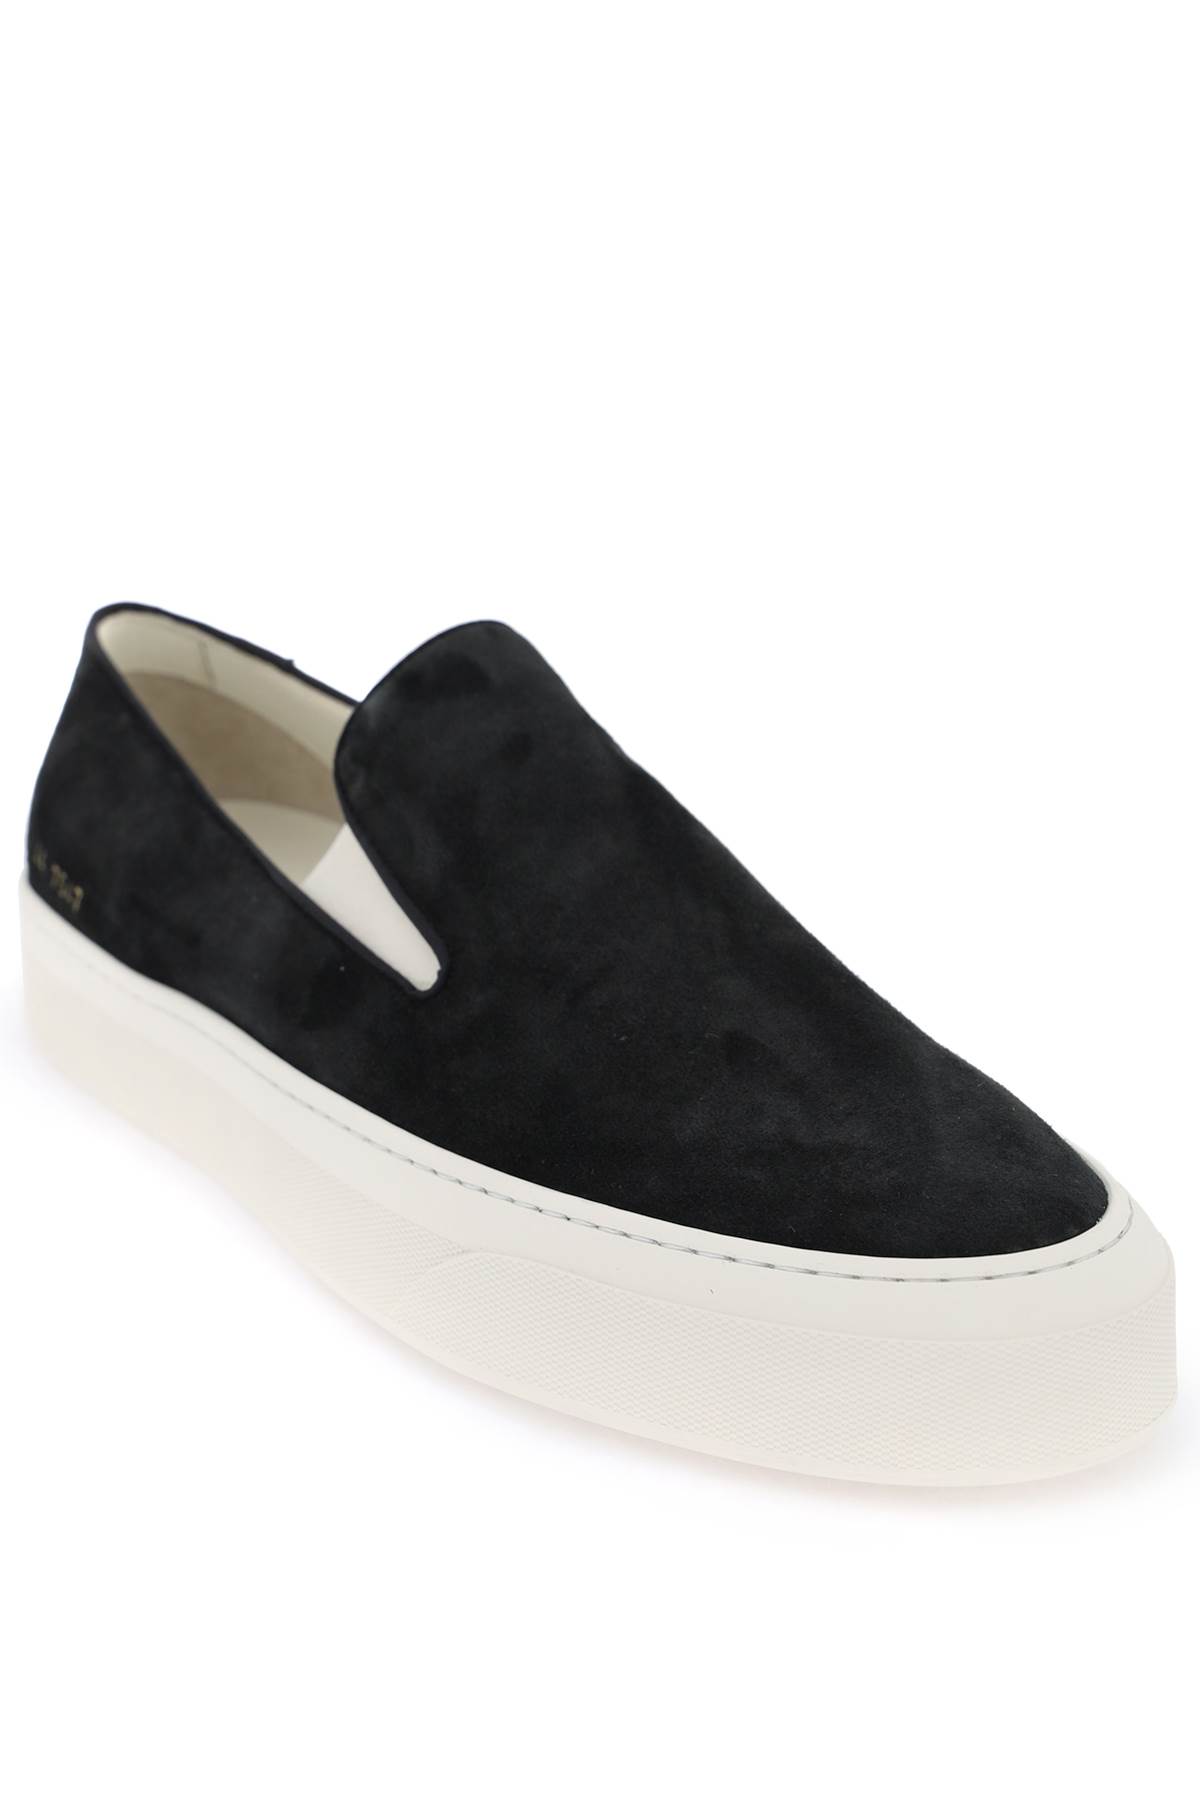 Shop Common Projects Slip-on Sneakers In Black (black)